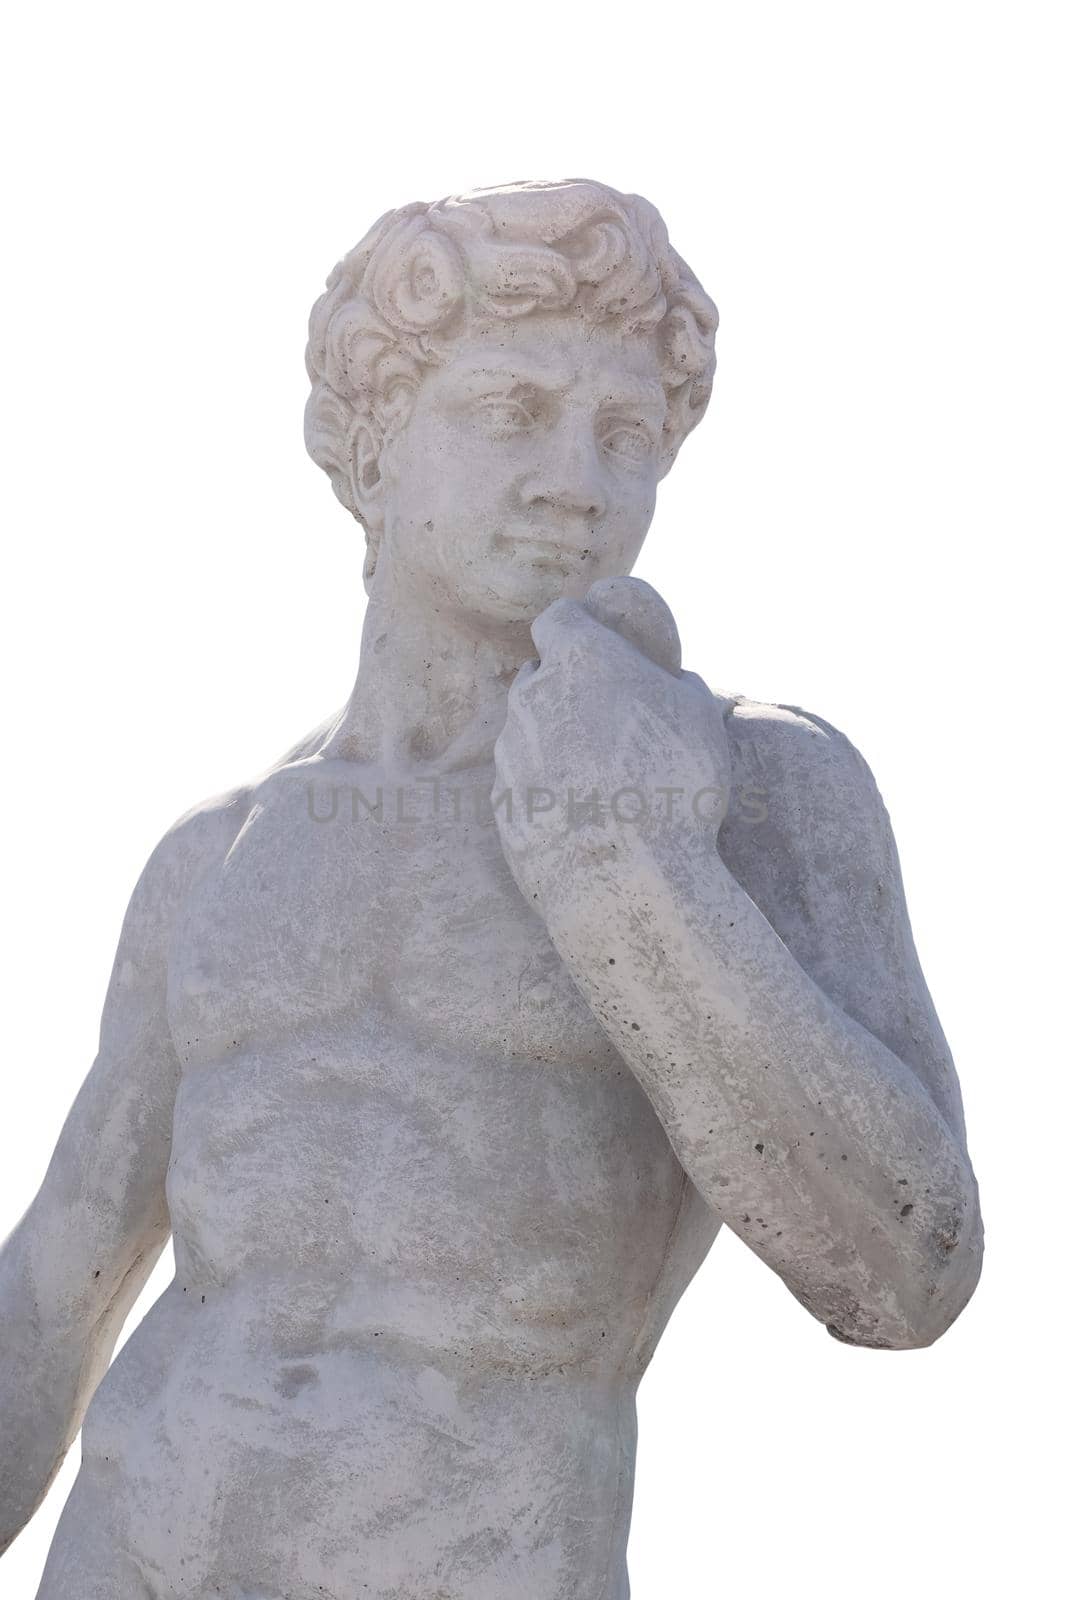 Ancient man's upper body stone sculpture on white background by Wavebreakmedia